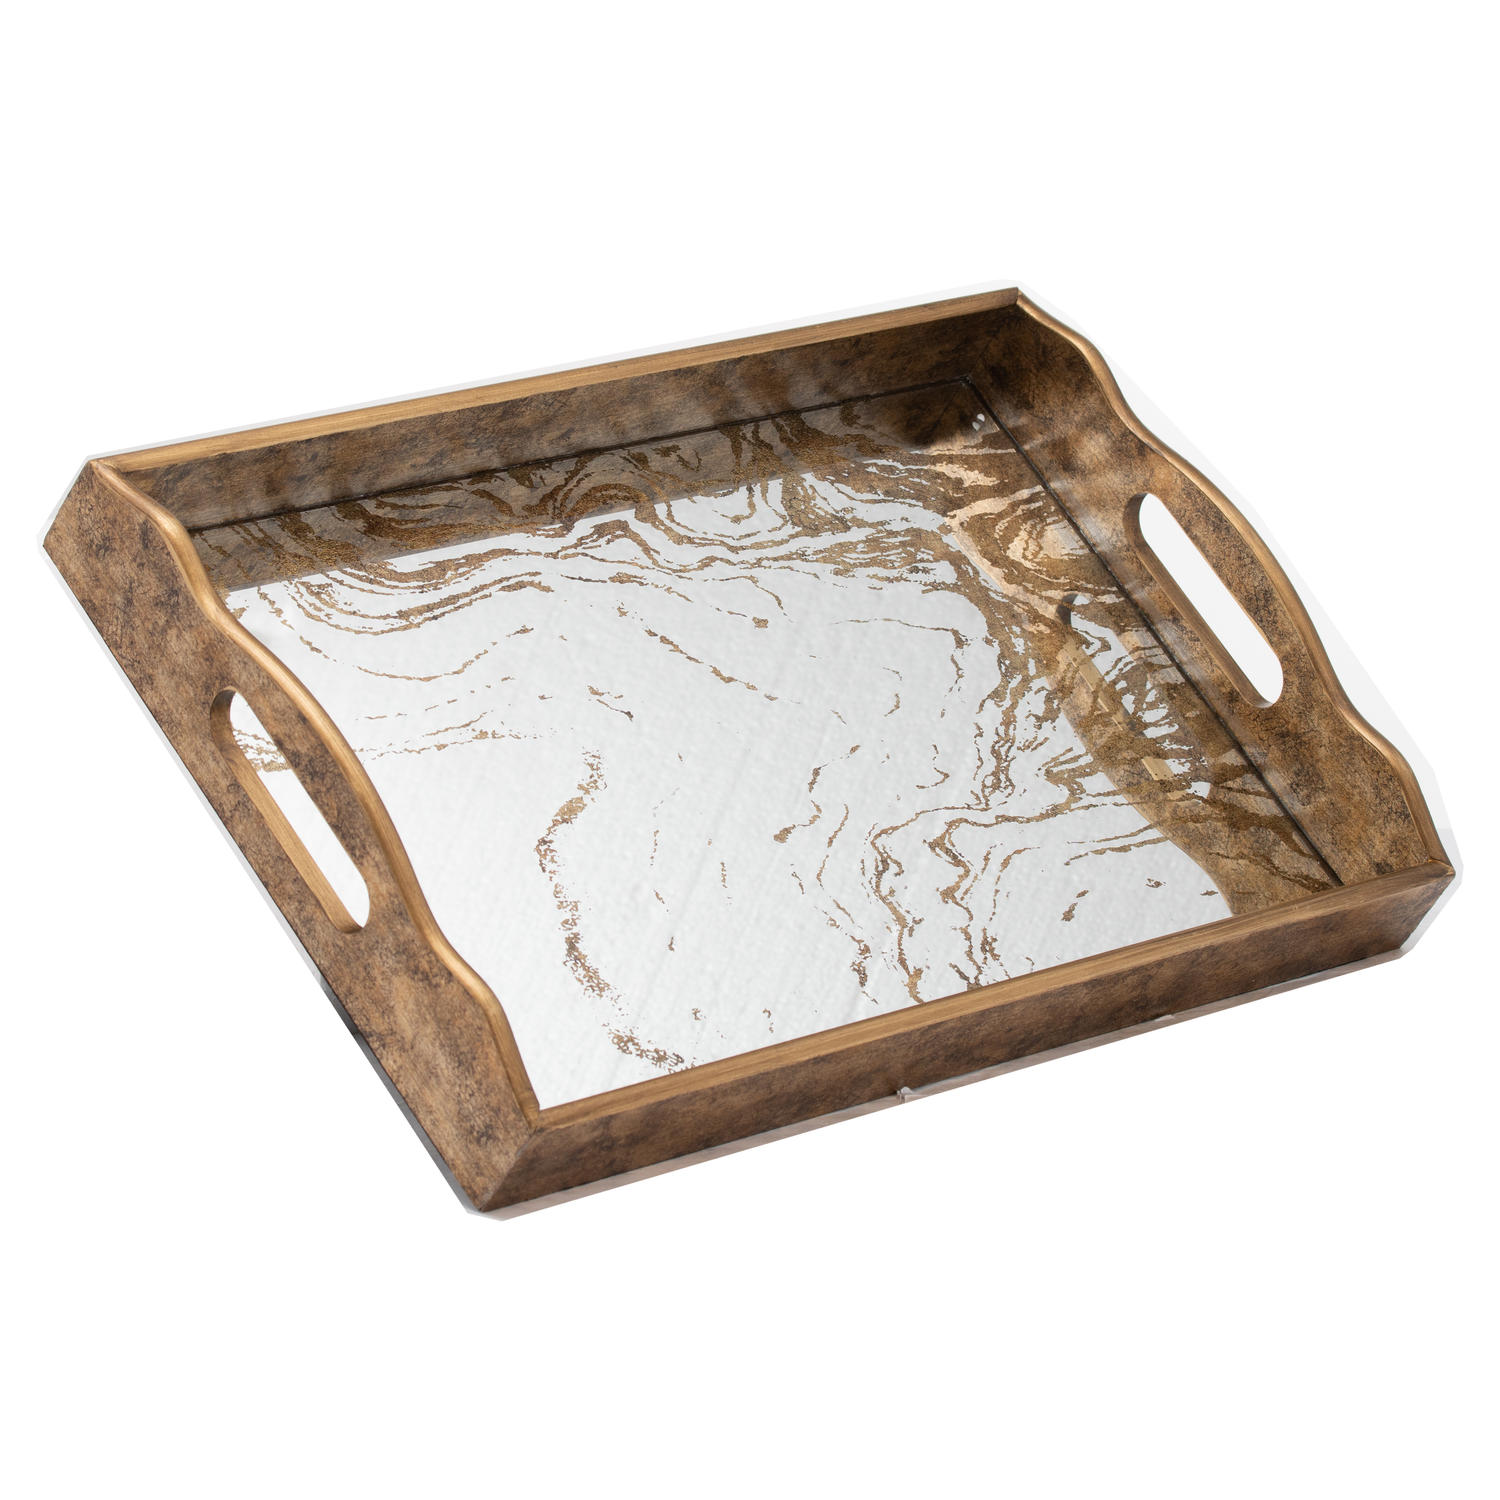 Augustus Large Mirrored Tray With Marbling Effect - Image 1